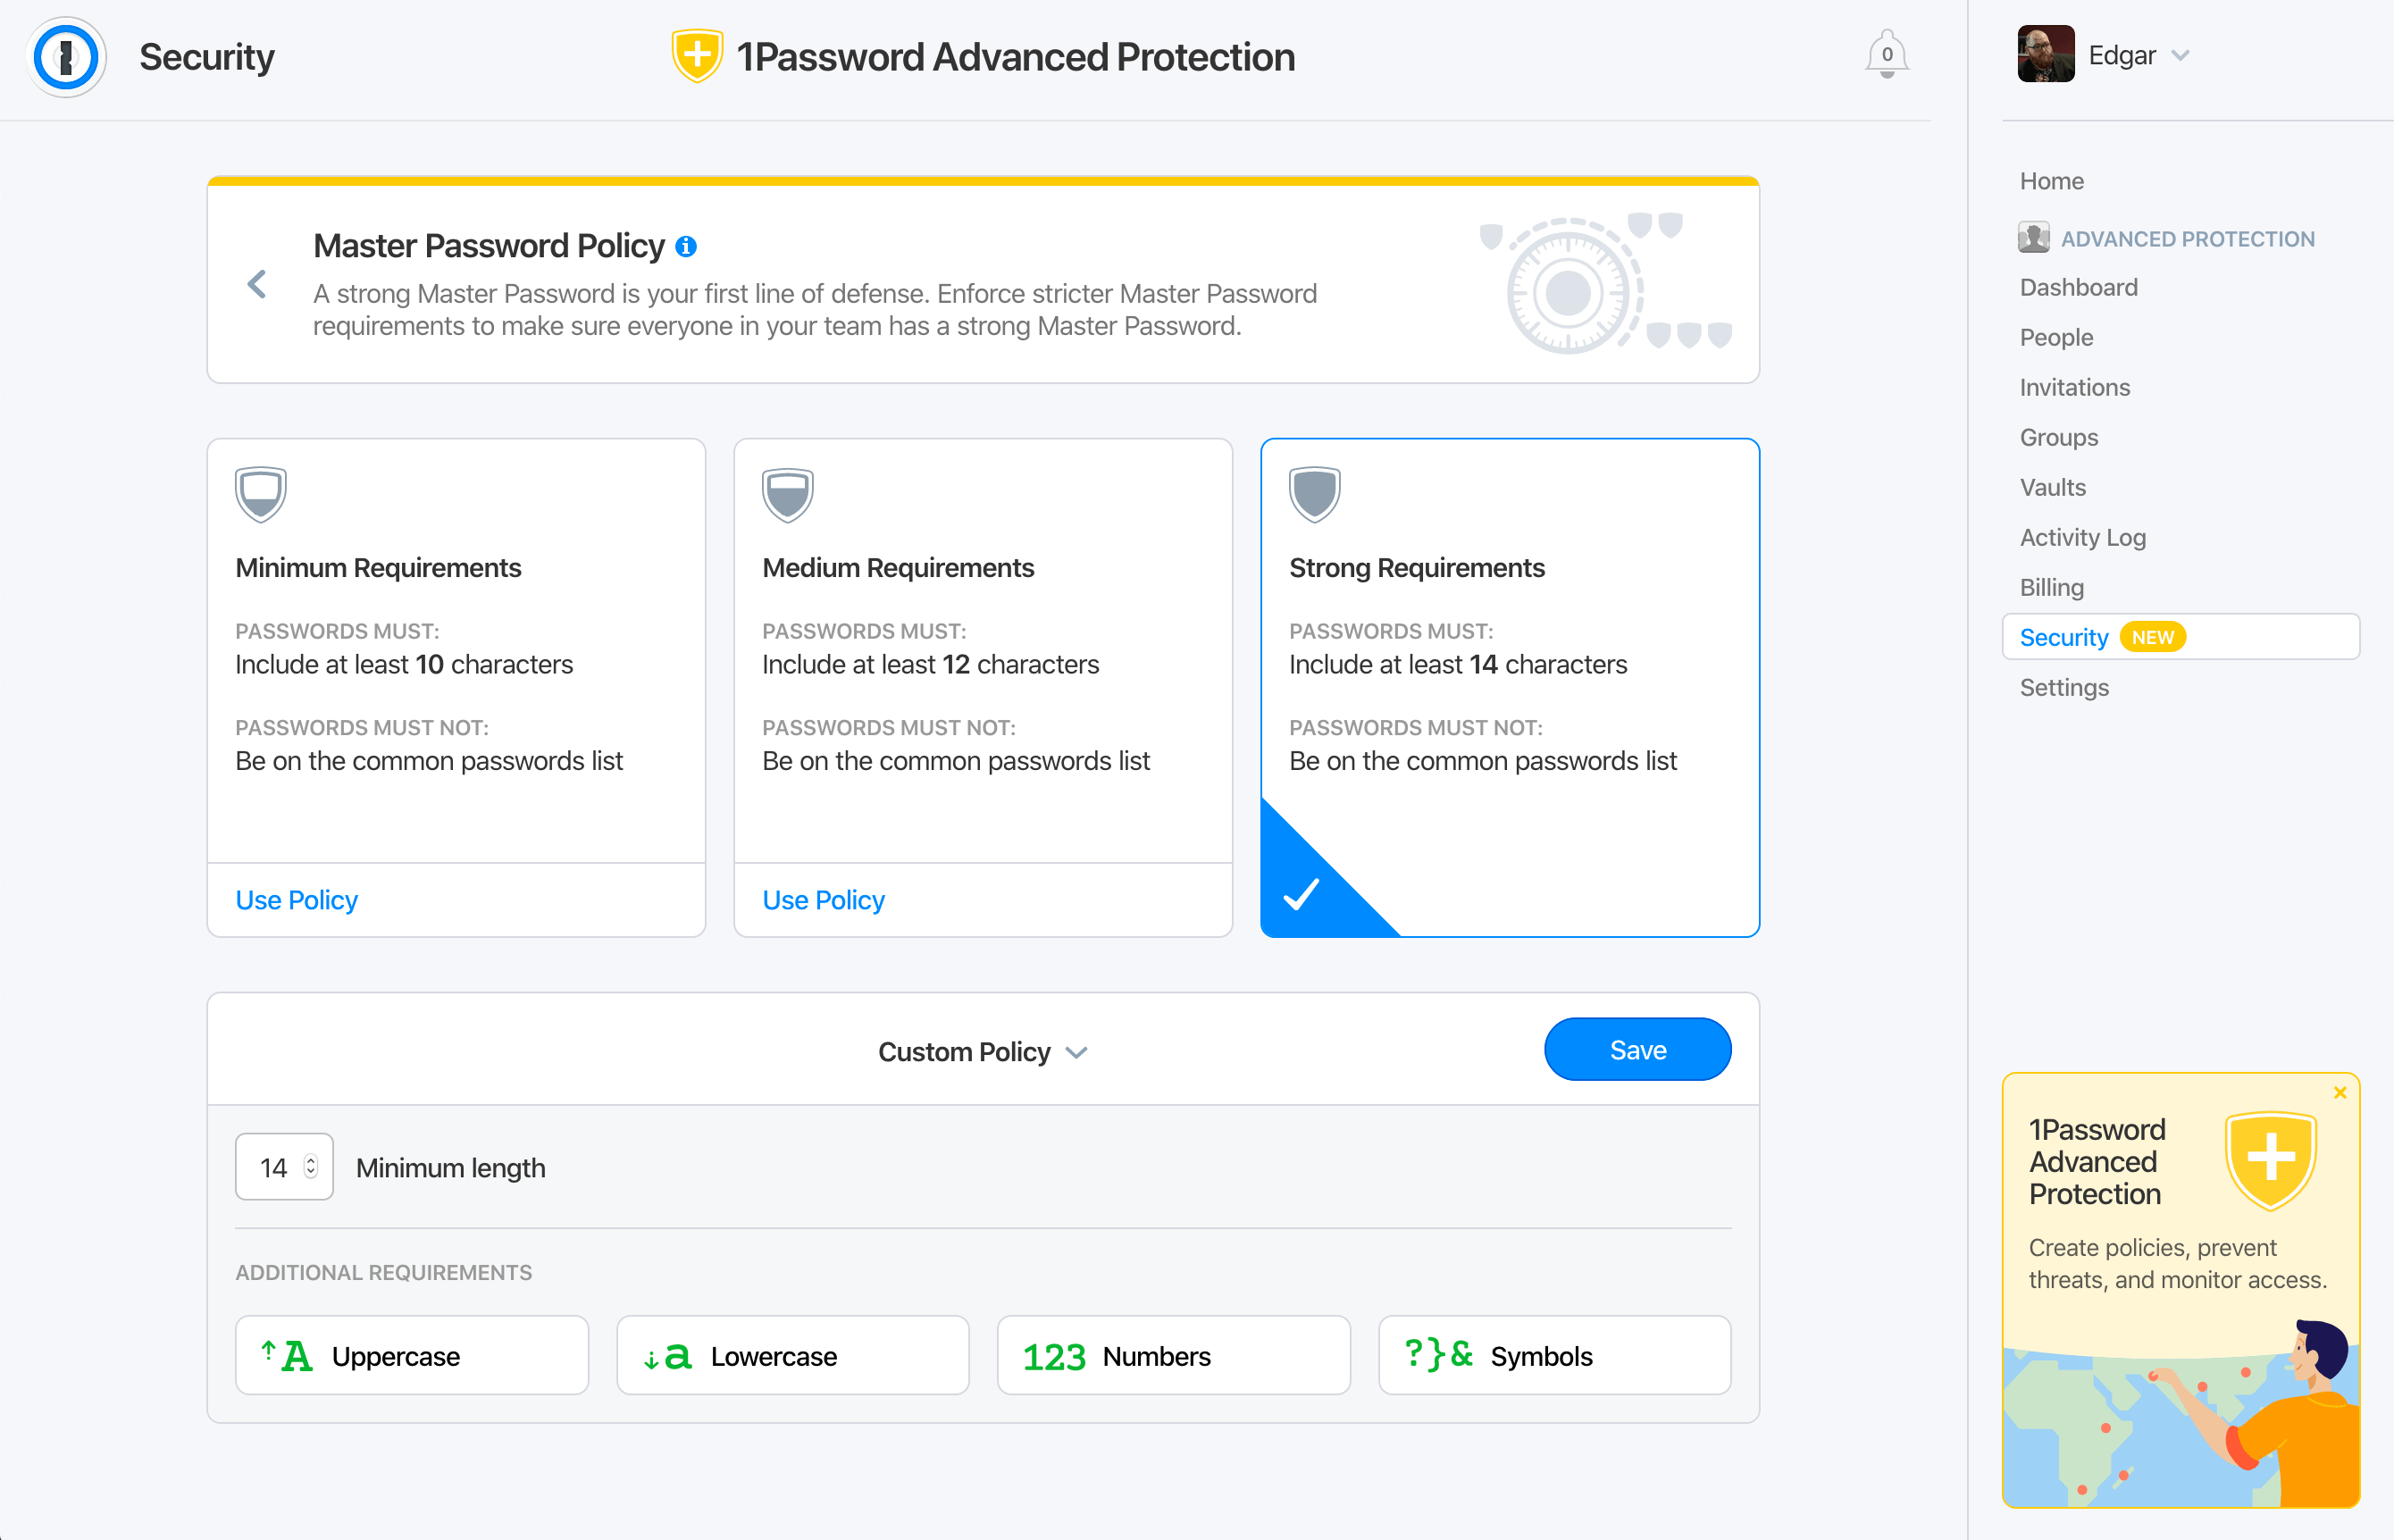 Screenshot of Master Password Policy controls in 1Password Advanced Protection